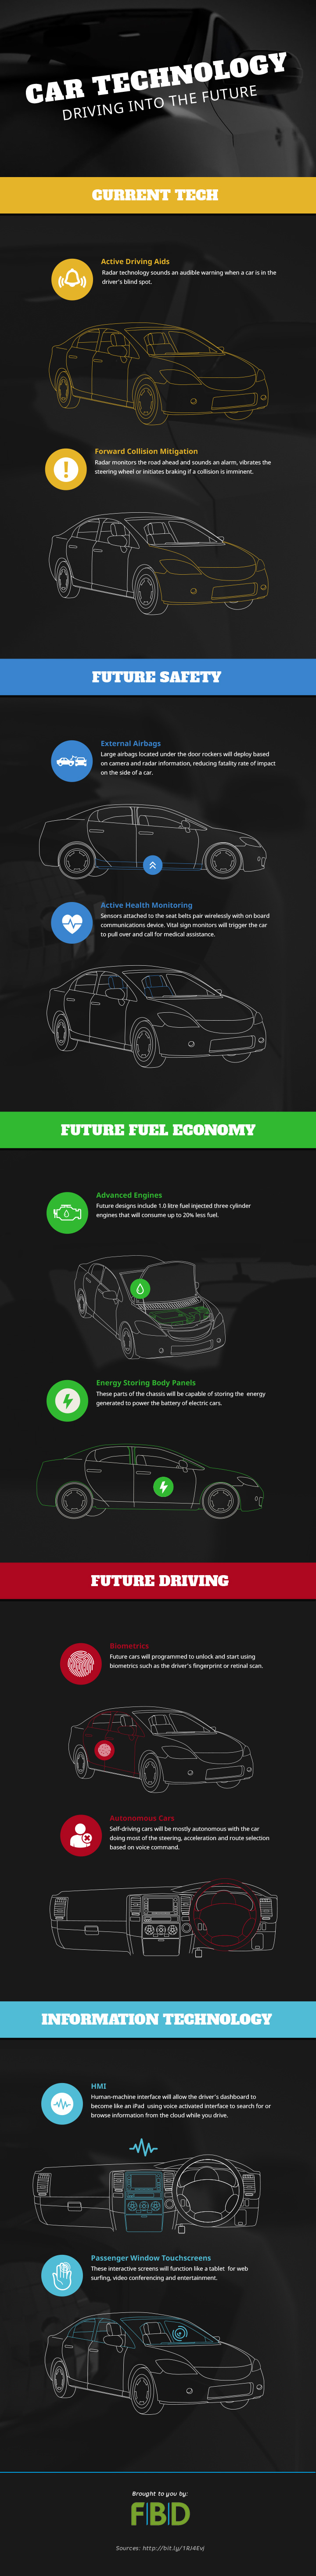 car technology infographic